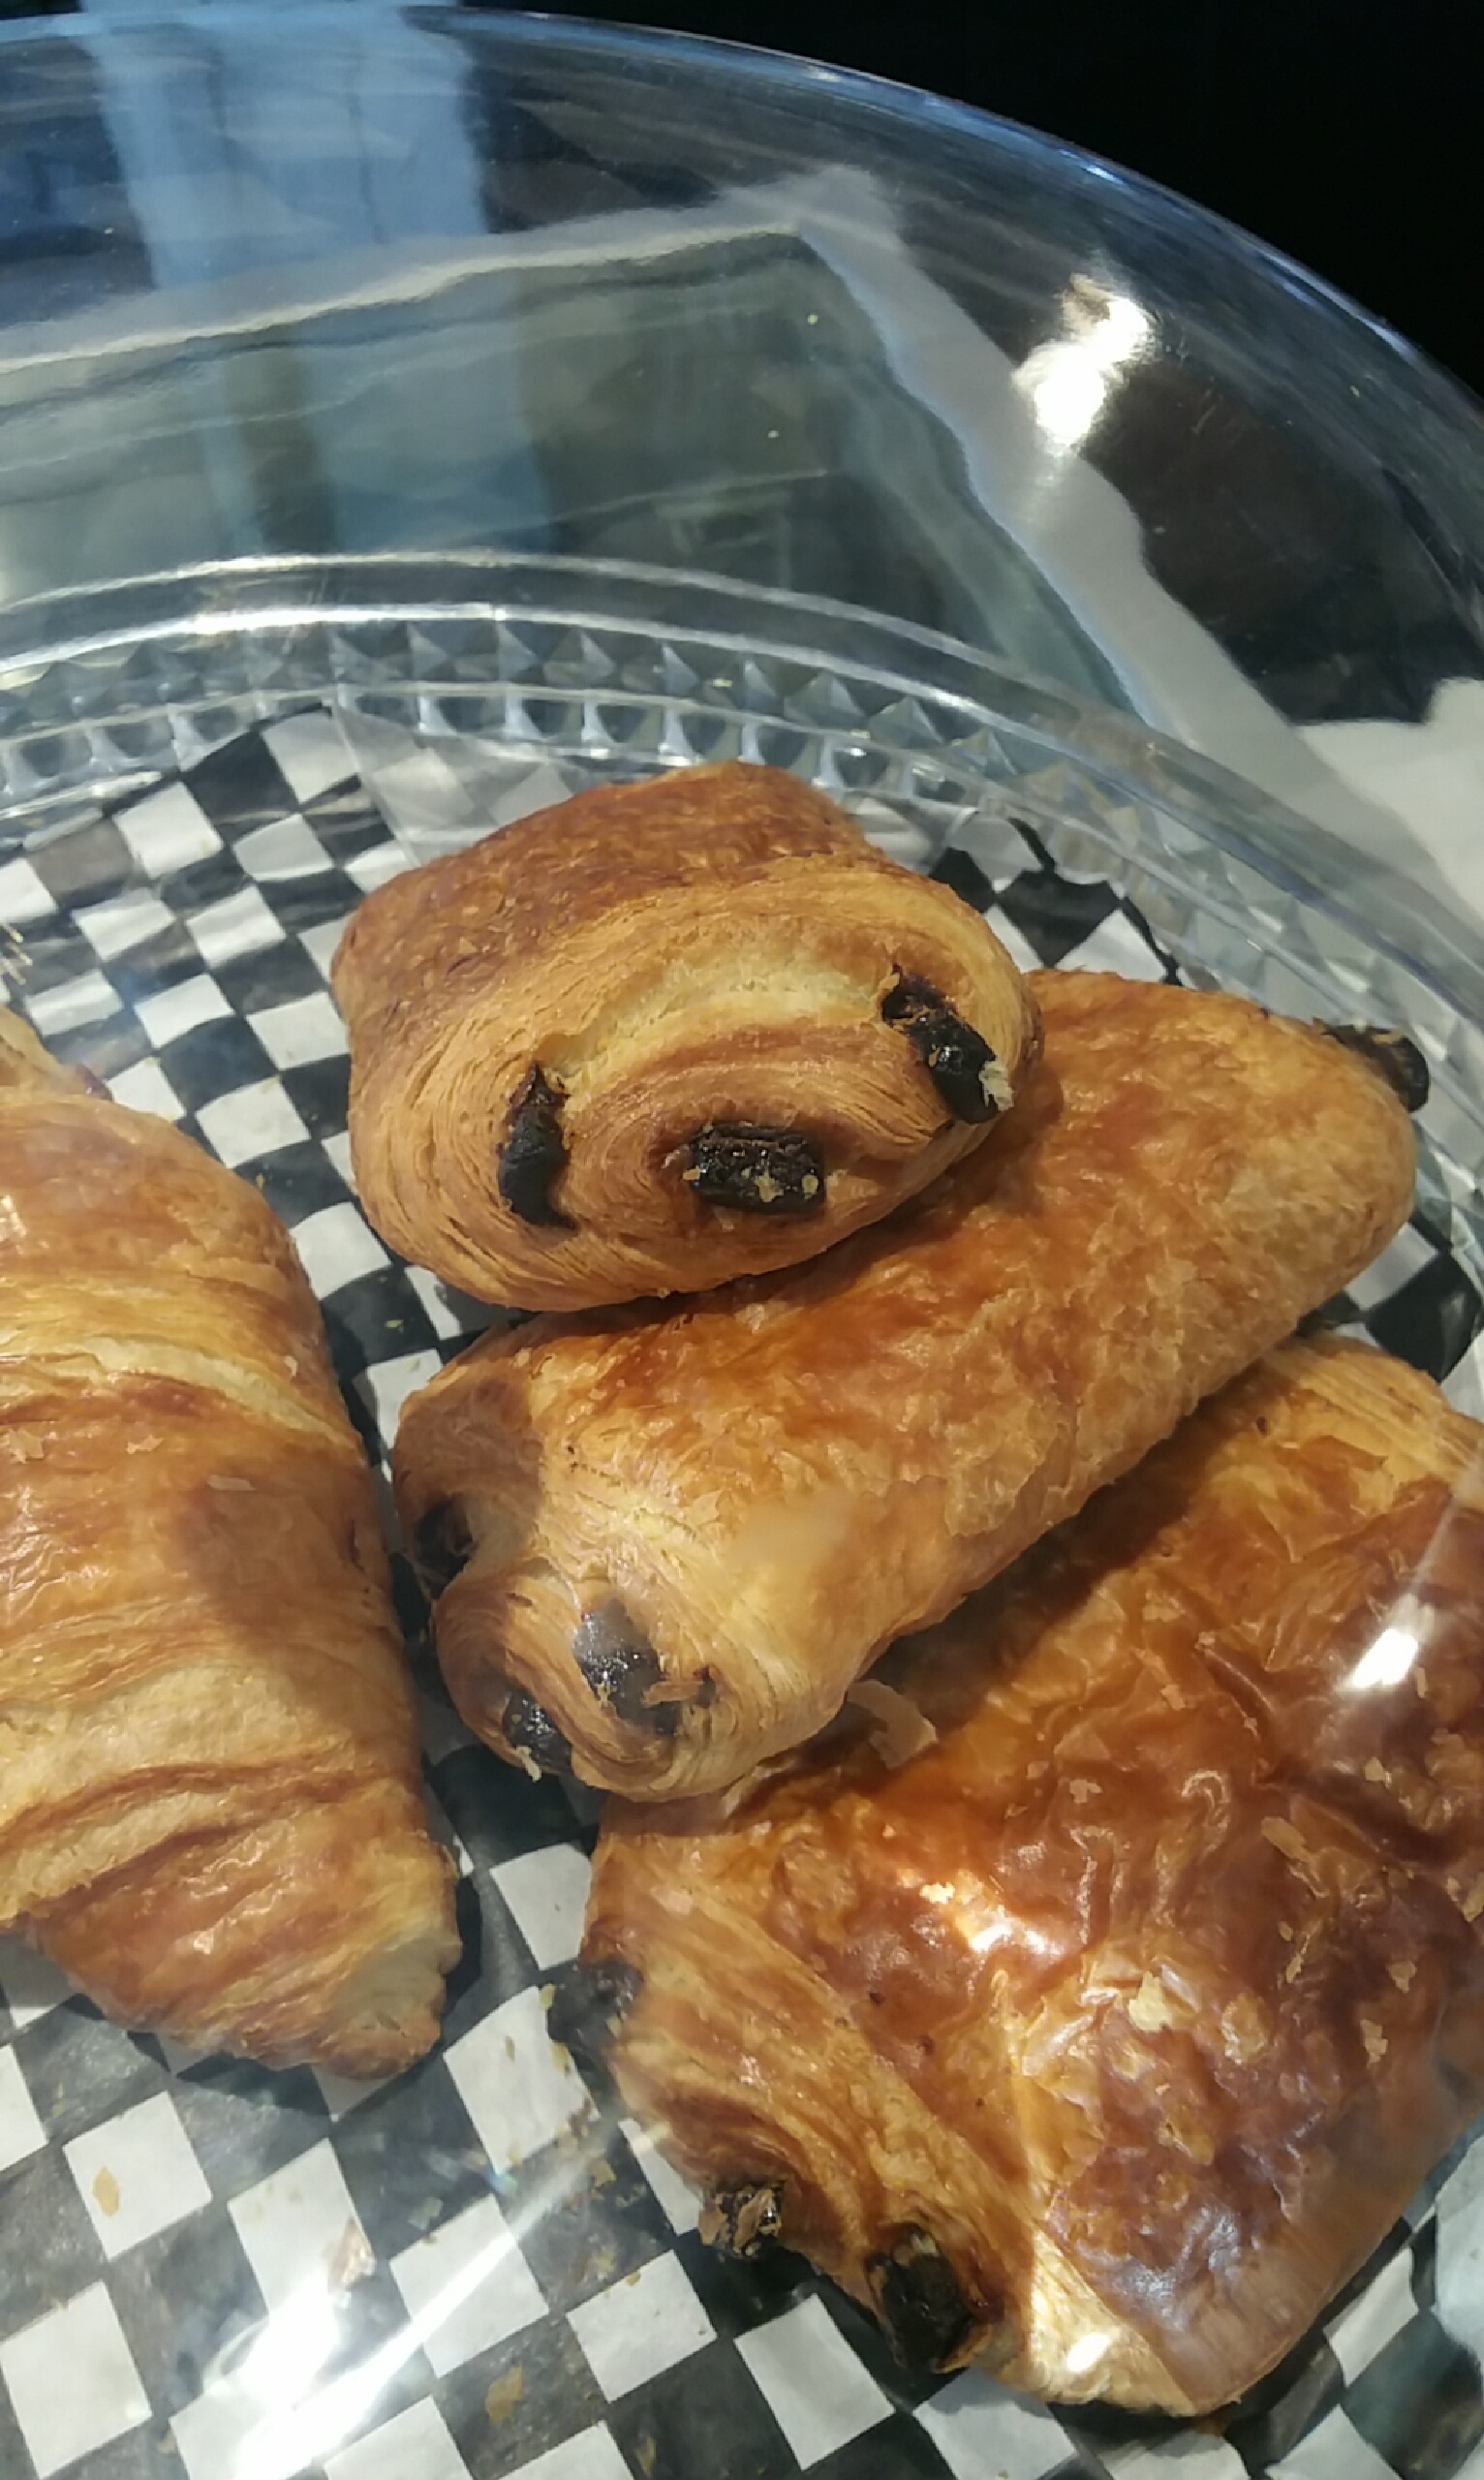 These chocolate croissants look like sloths.